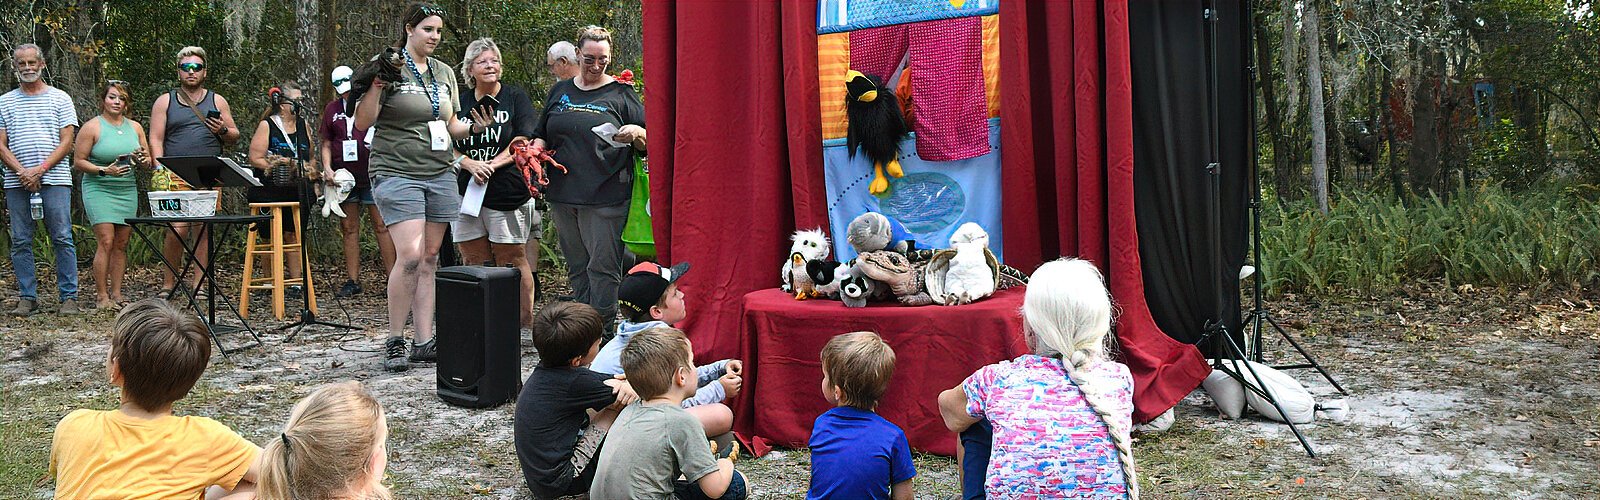 The Wonders of Wildlife Festival presented a puppet show by the Raptor Center of Tampa Bay that emphasized current conservation issues.